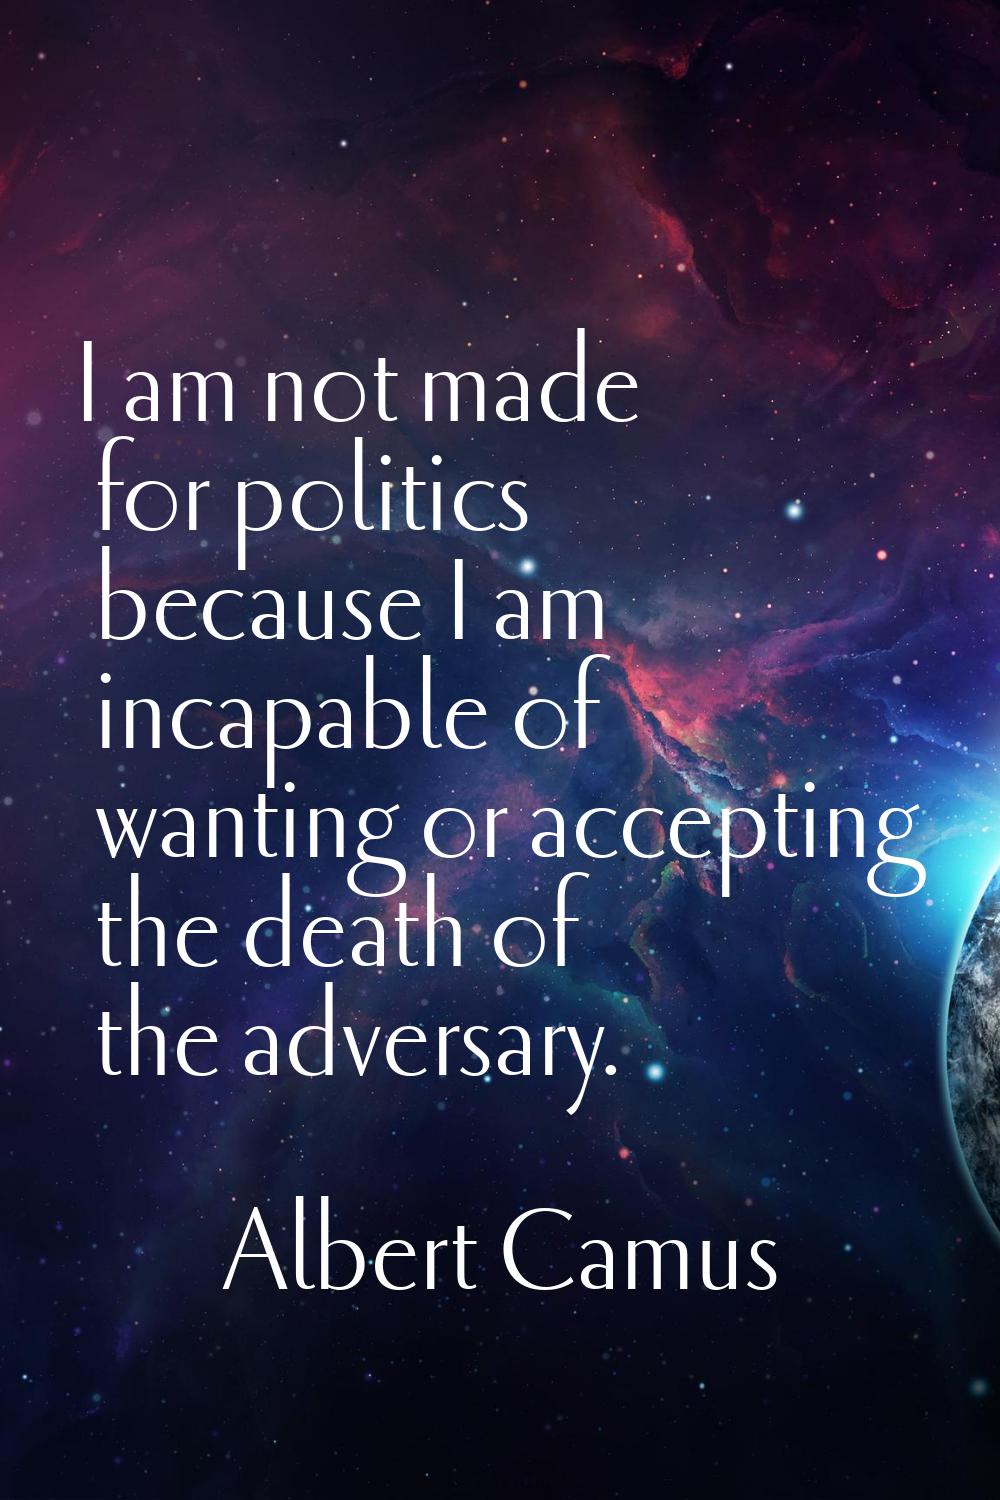 I am not made for politics because I am incapable of wanting or accepting the death of the adversar